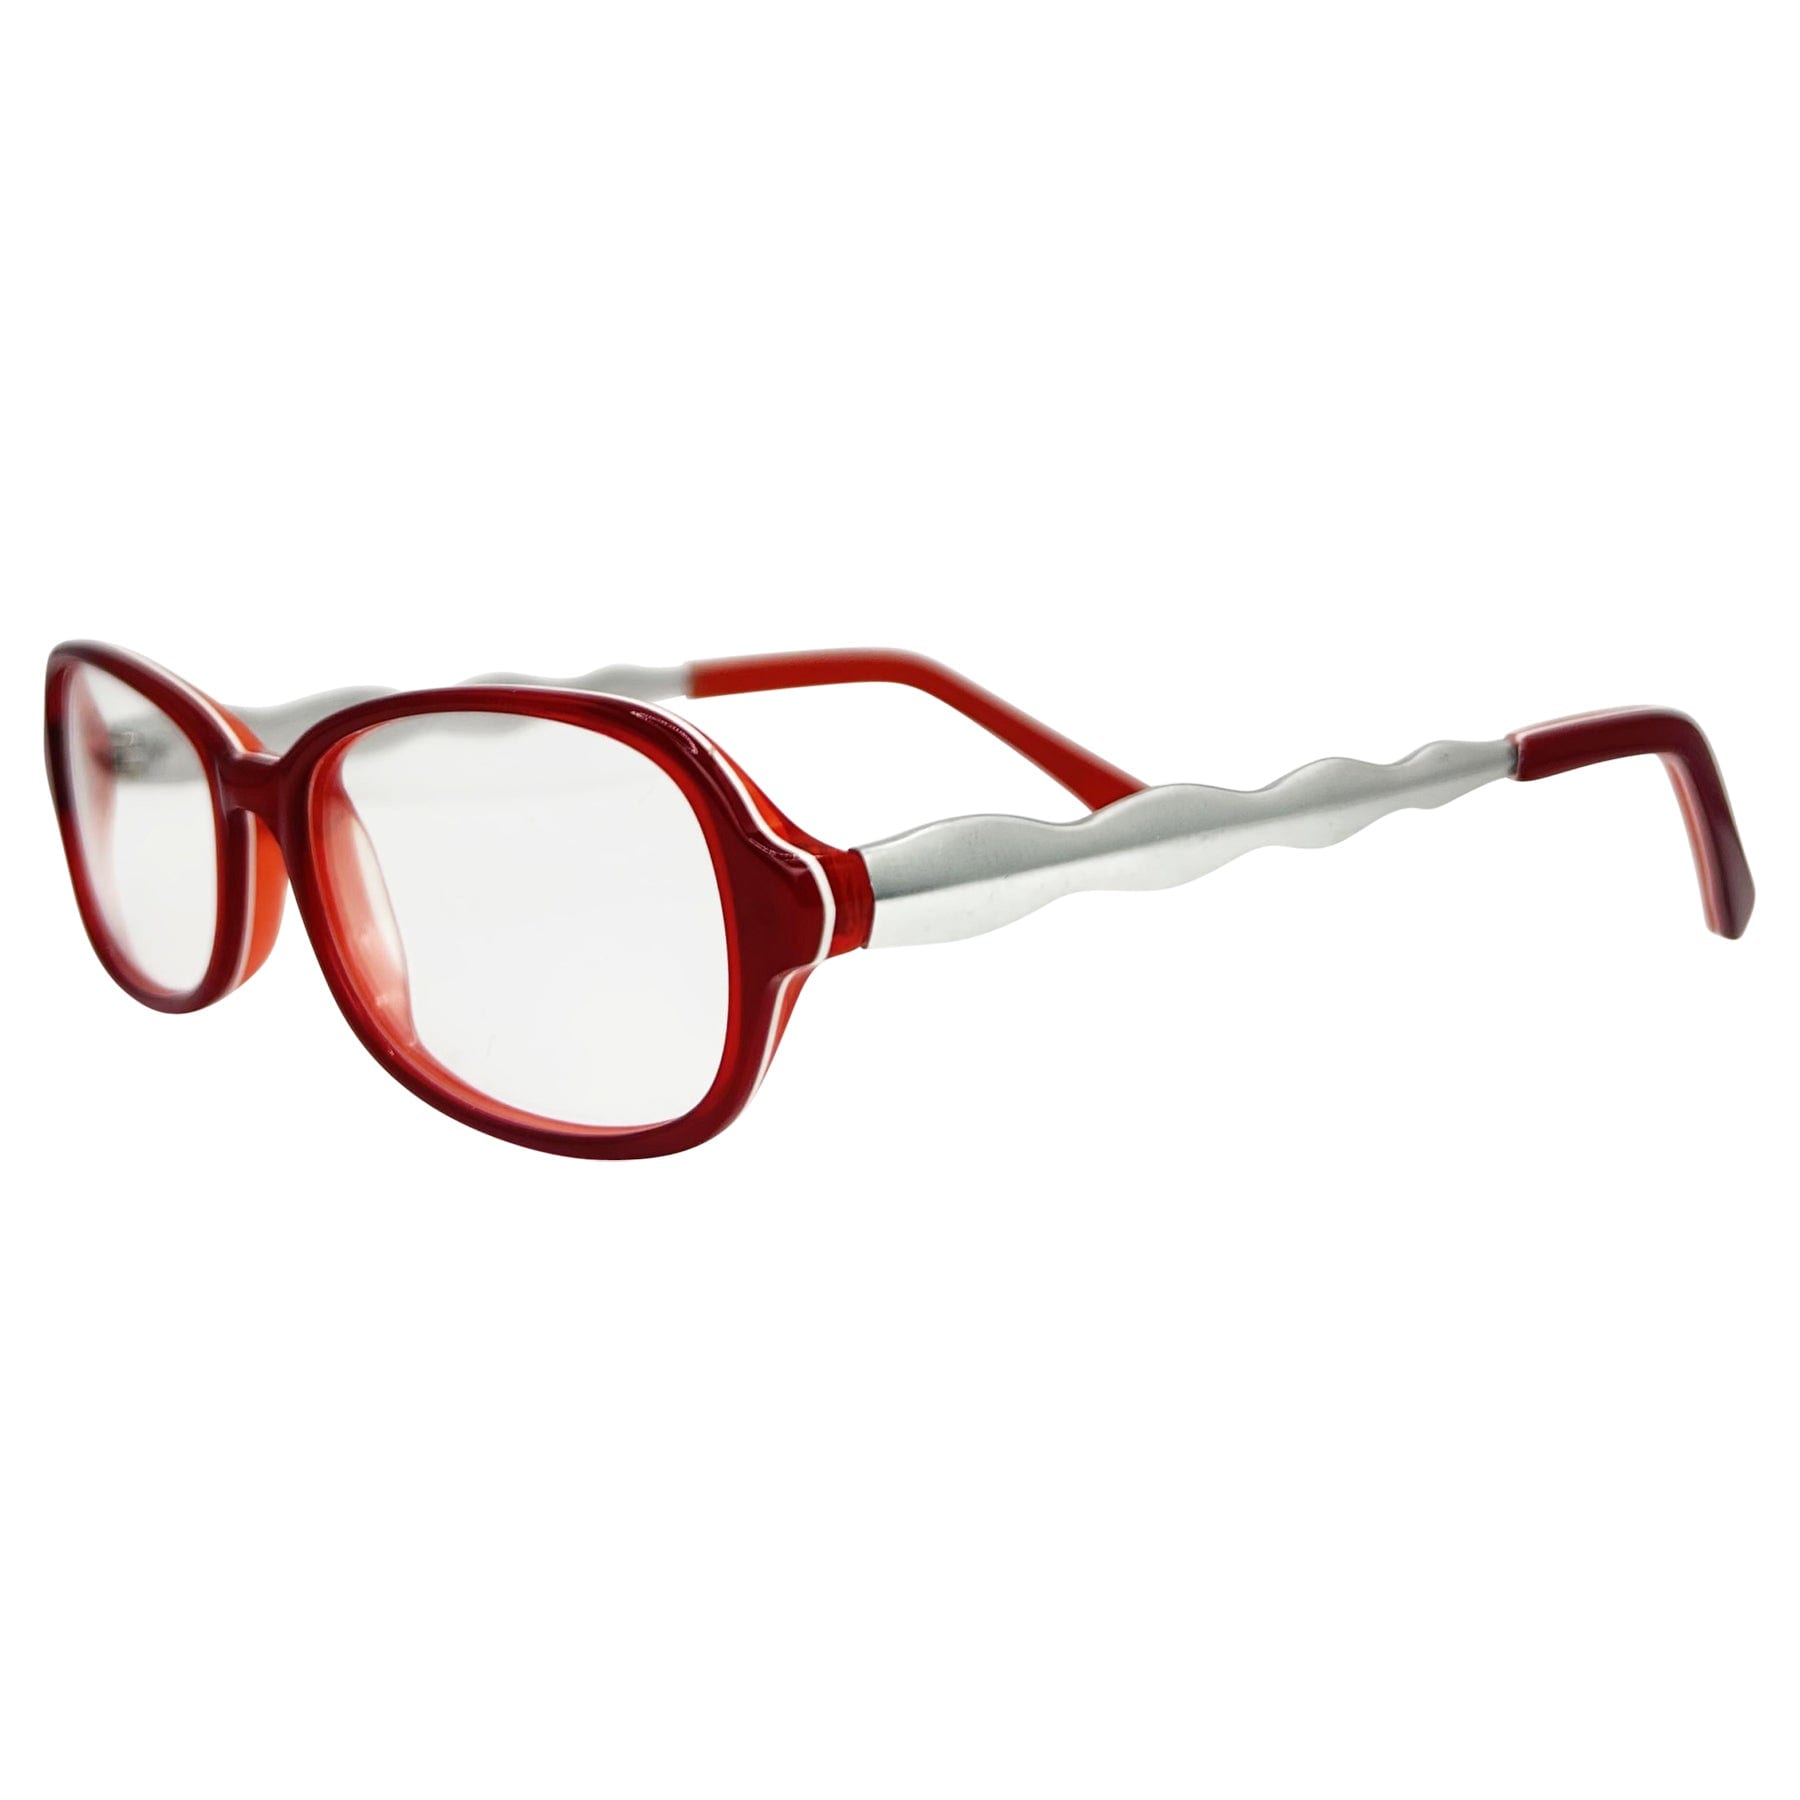 cherry colored and silver glasses with a round square shape and bayonetta-style frame